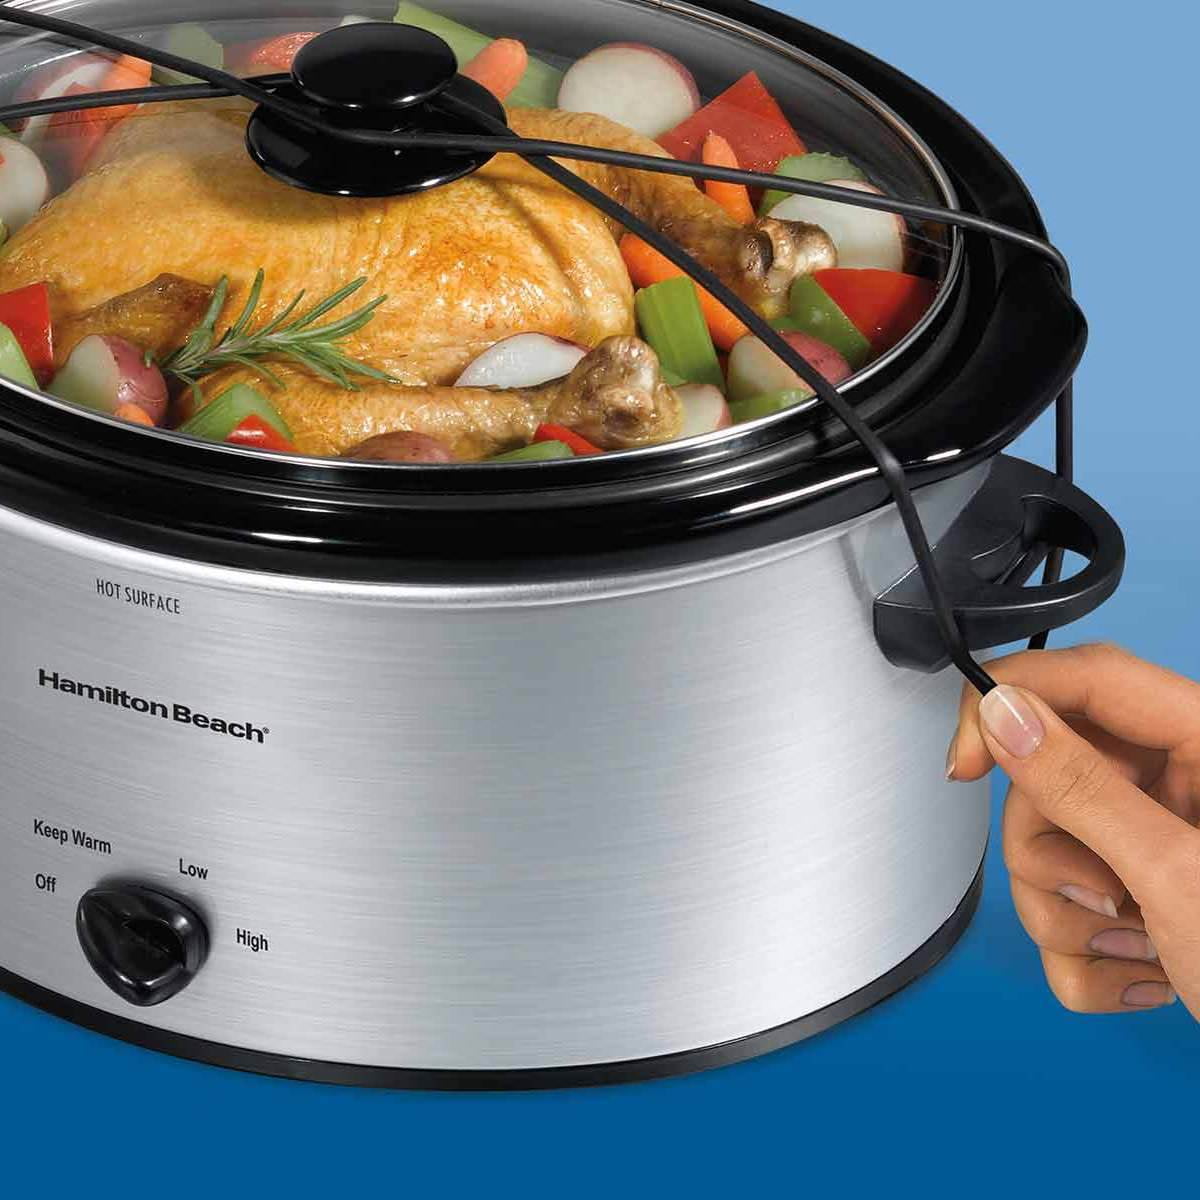 Hamilton Beach's slow cooker and dip warmer set is $18 off at Walmart